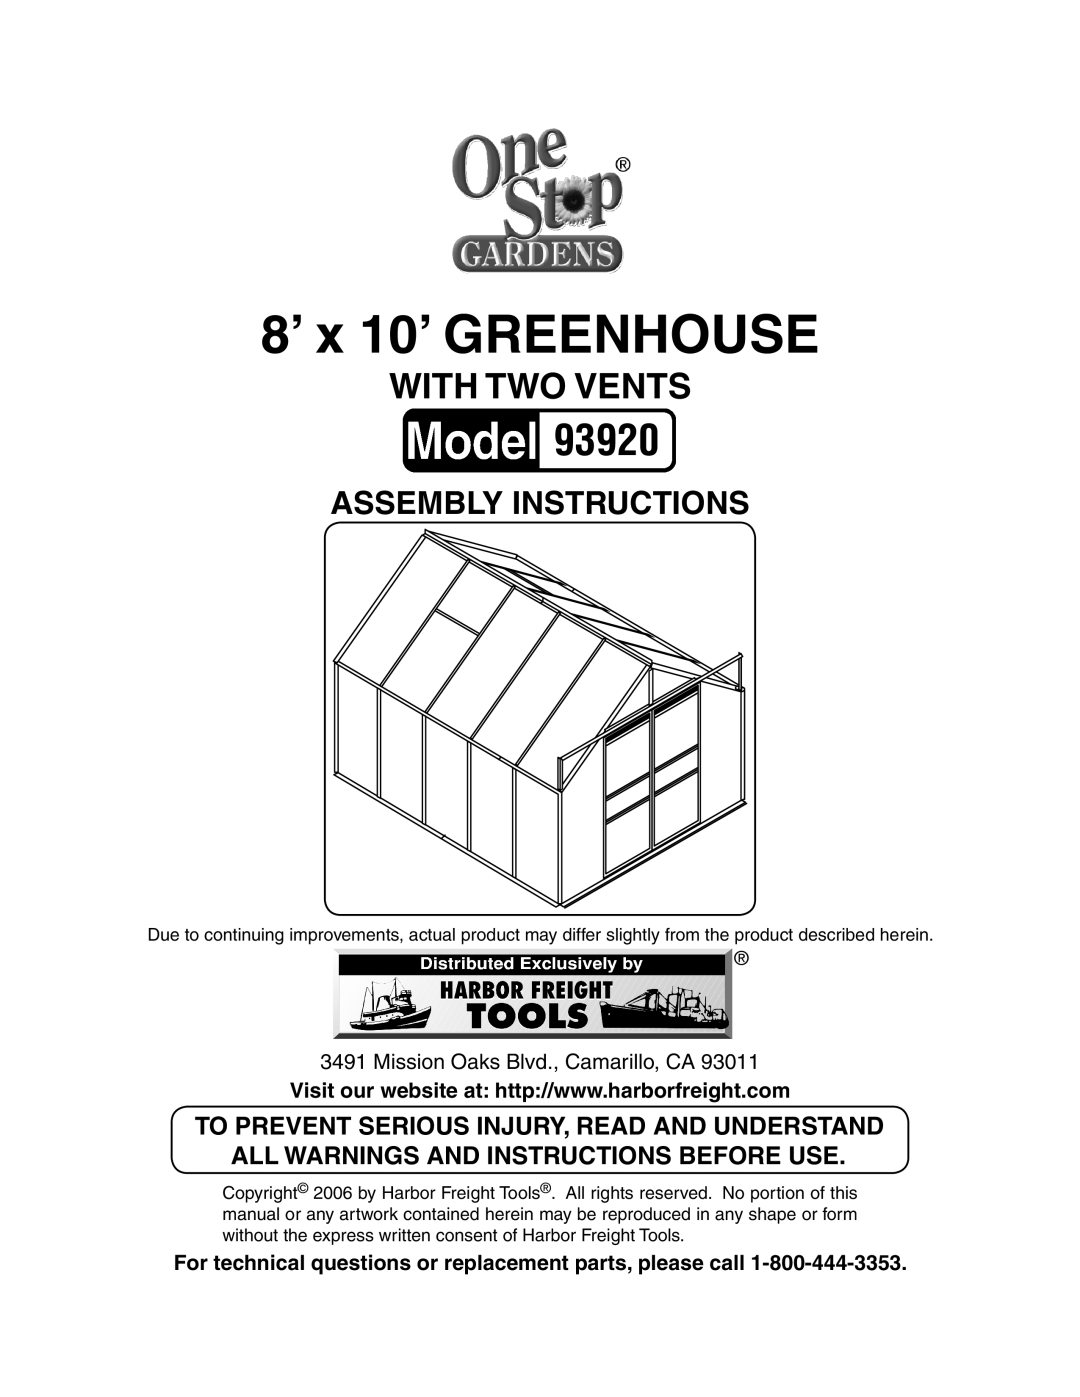 Harbor Freight Tools 93920 manual 8’ x 10’ GREENHOUSE, To prevent serious injury, read and understand, With Two Vents 